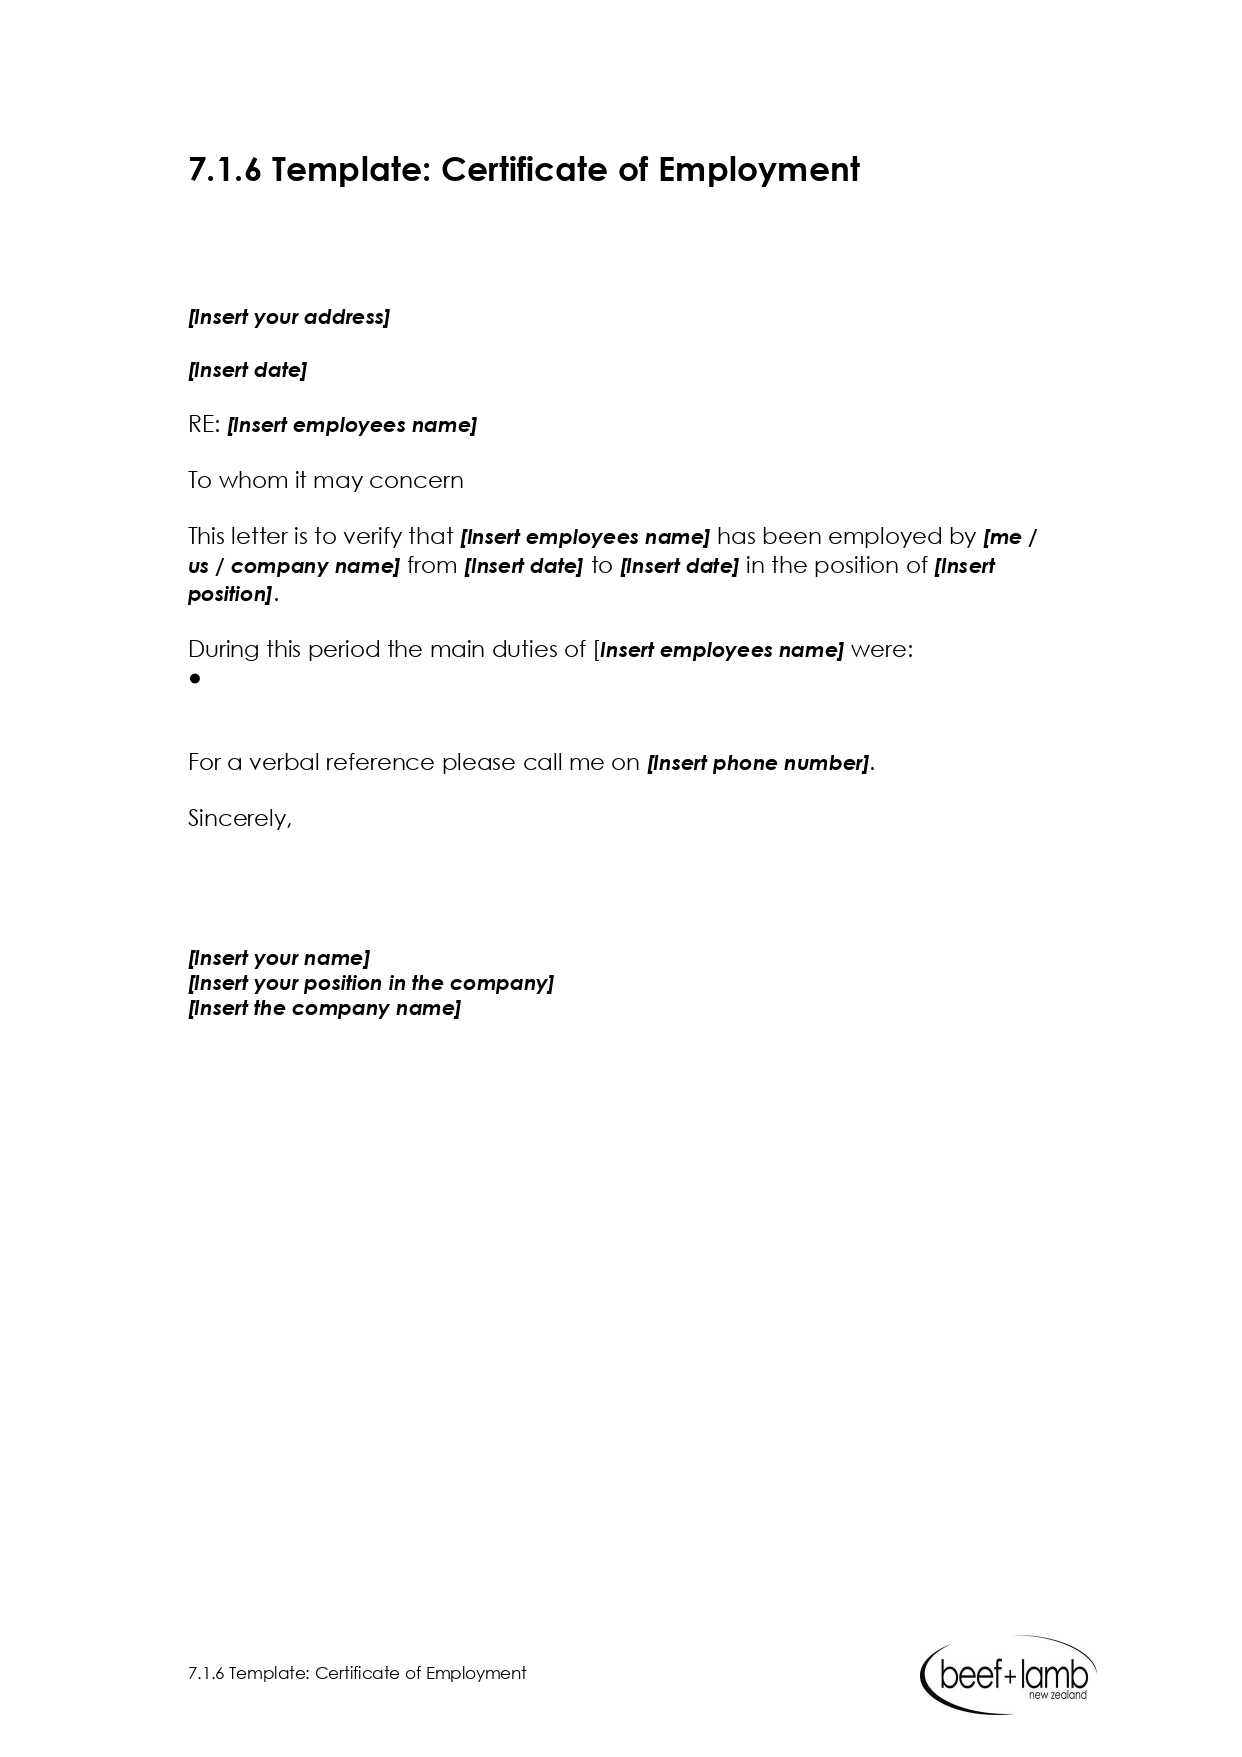 Editable Certificate Of Employment Template - Google Docs Throughout Template Of Certificate Of Employment